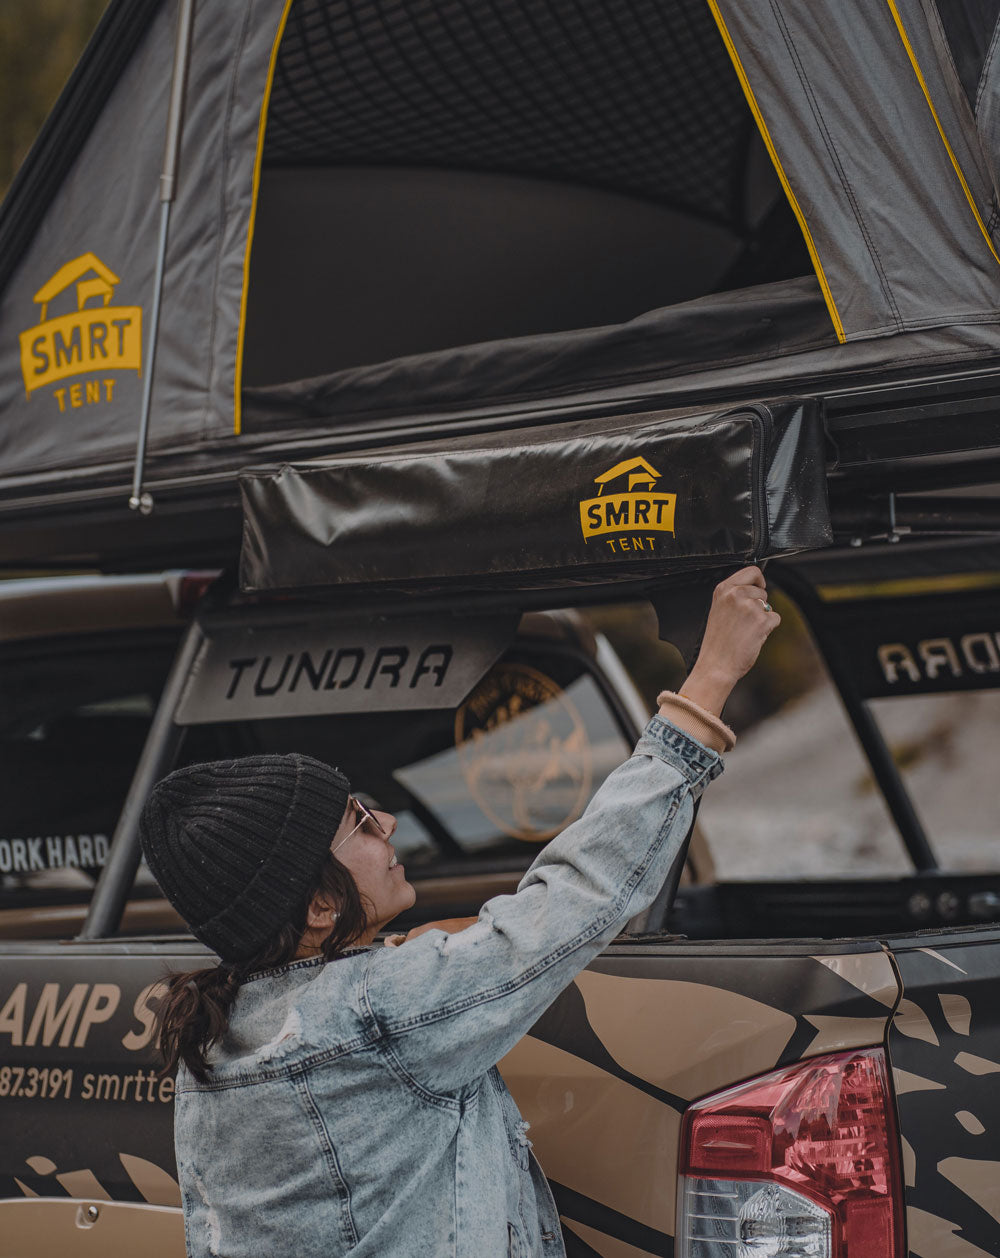 Pictured from the chest up with her back facing the camera, is a female model wearing sunglasses, a black toque, and an acid-washed jean jacket. She is reaching up and unzipping the packed-up SMRT Tent Camp Shower Kit. Her surroundings are a Toyota Tundra truck and her Summit Suite SMRT Tent Roof Top Tent in Grey. Perfect for your Canada roof top tent truck adventure! Available for sale by SMRT Tent in Edmonton, Canada.